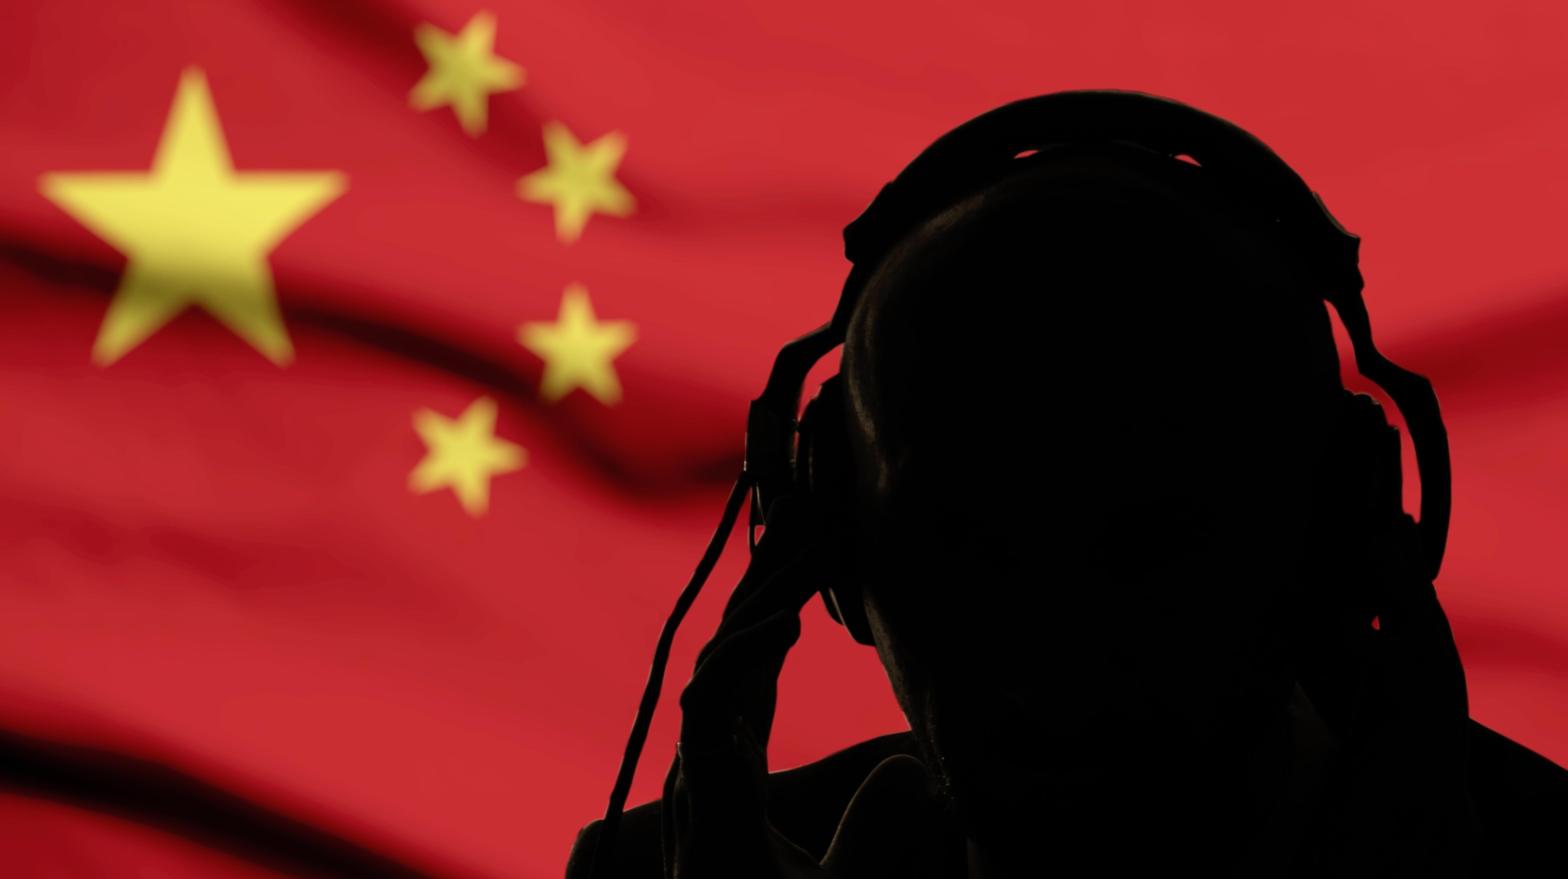 Federal prosecutors alleged people working for Chinese national police worked to set up Twitter bot farms and infiltrate Zoom calls to target Chinese dissidents. (Image: Anelo, Shutterstock)